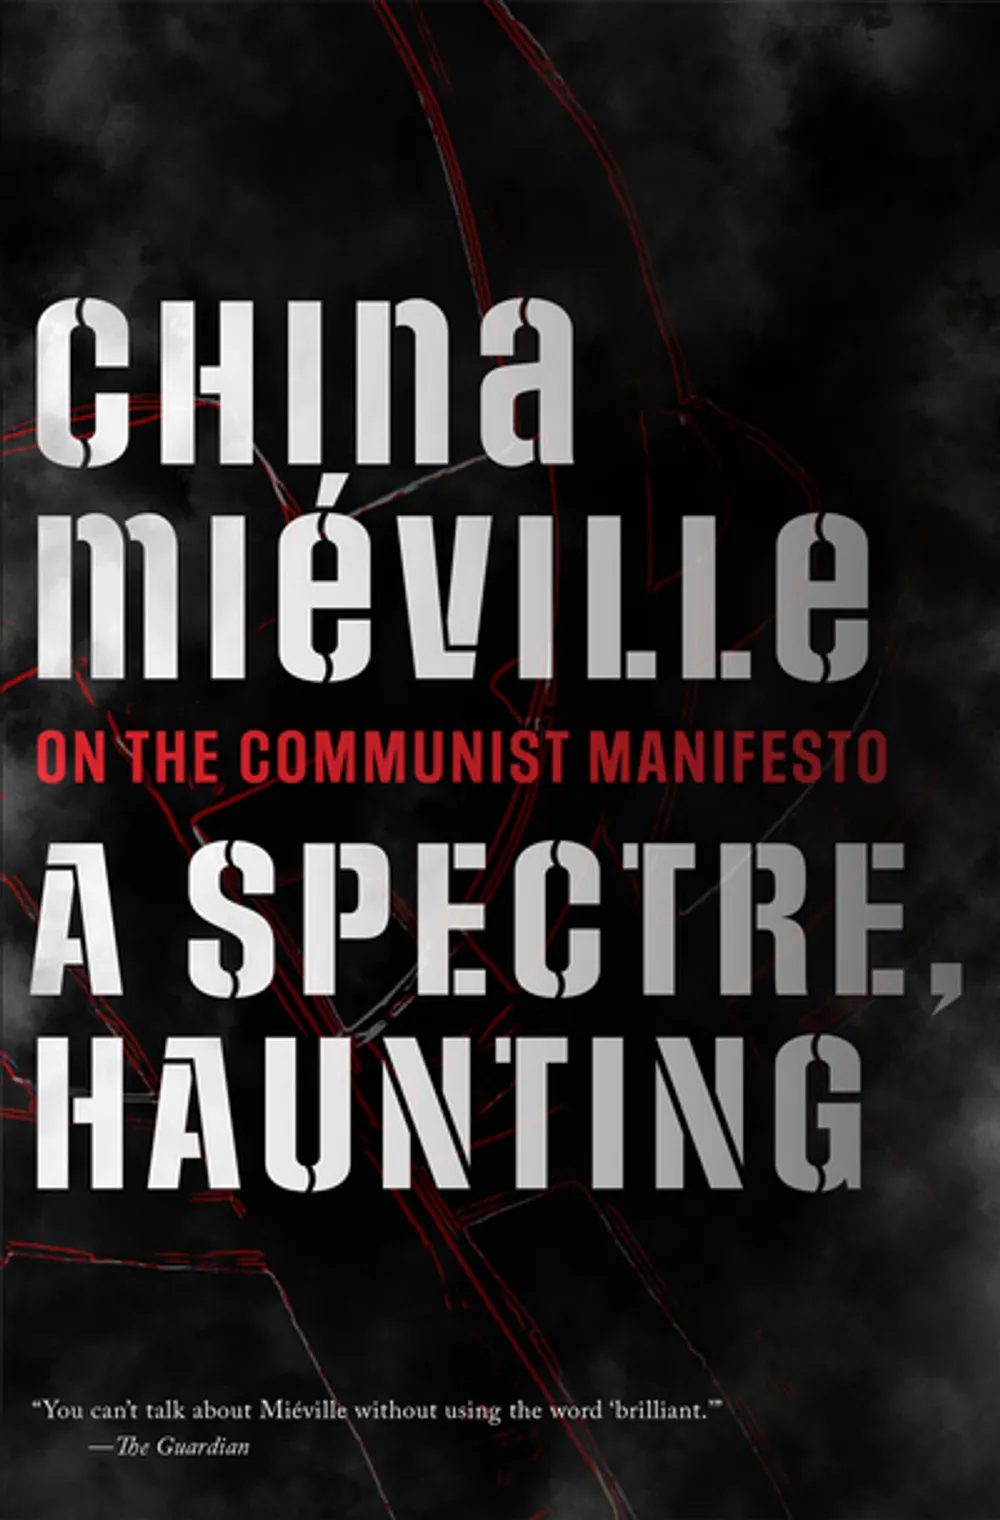 A Spectre, Haunting, by China Miéville